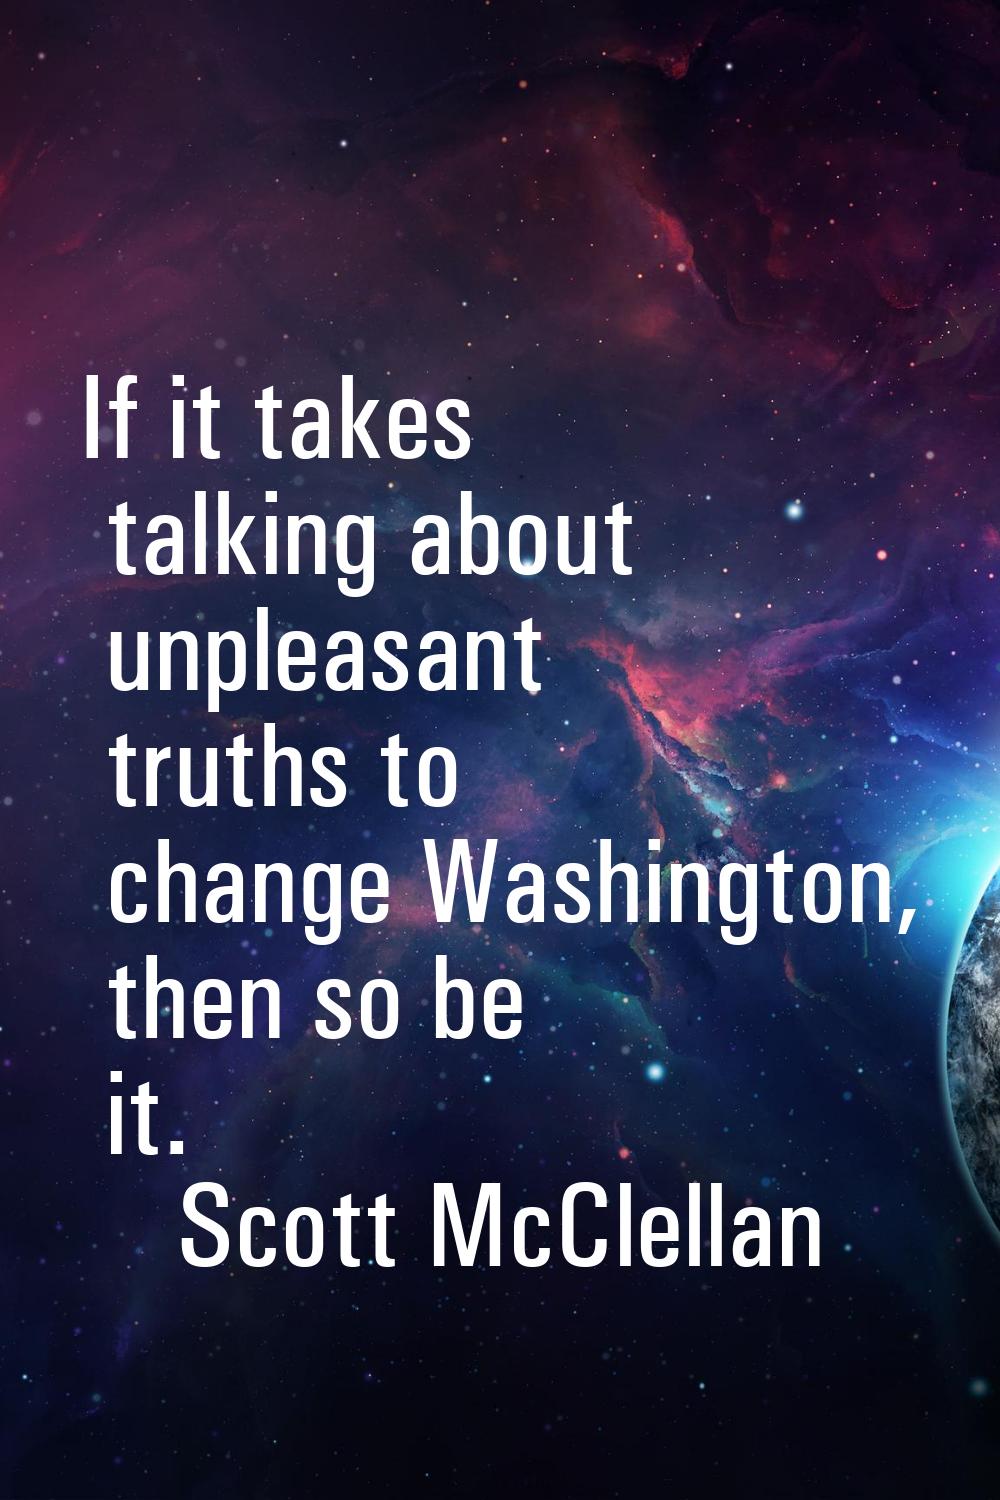 If it takes talking about unpleasant truths to change Washington, then so be it.